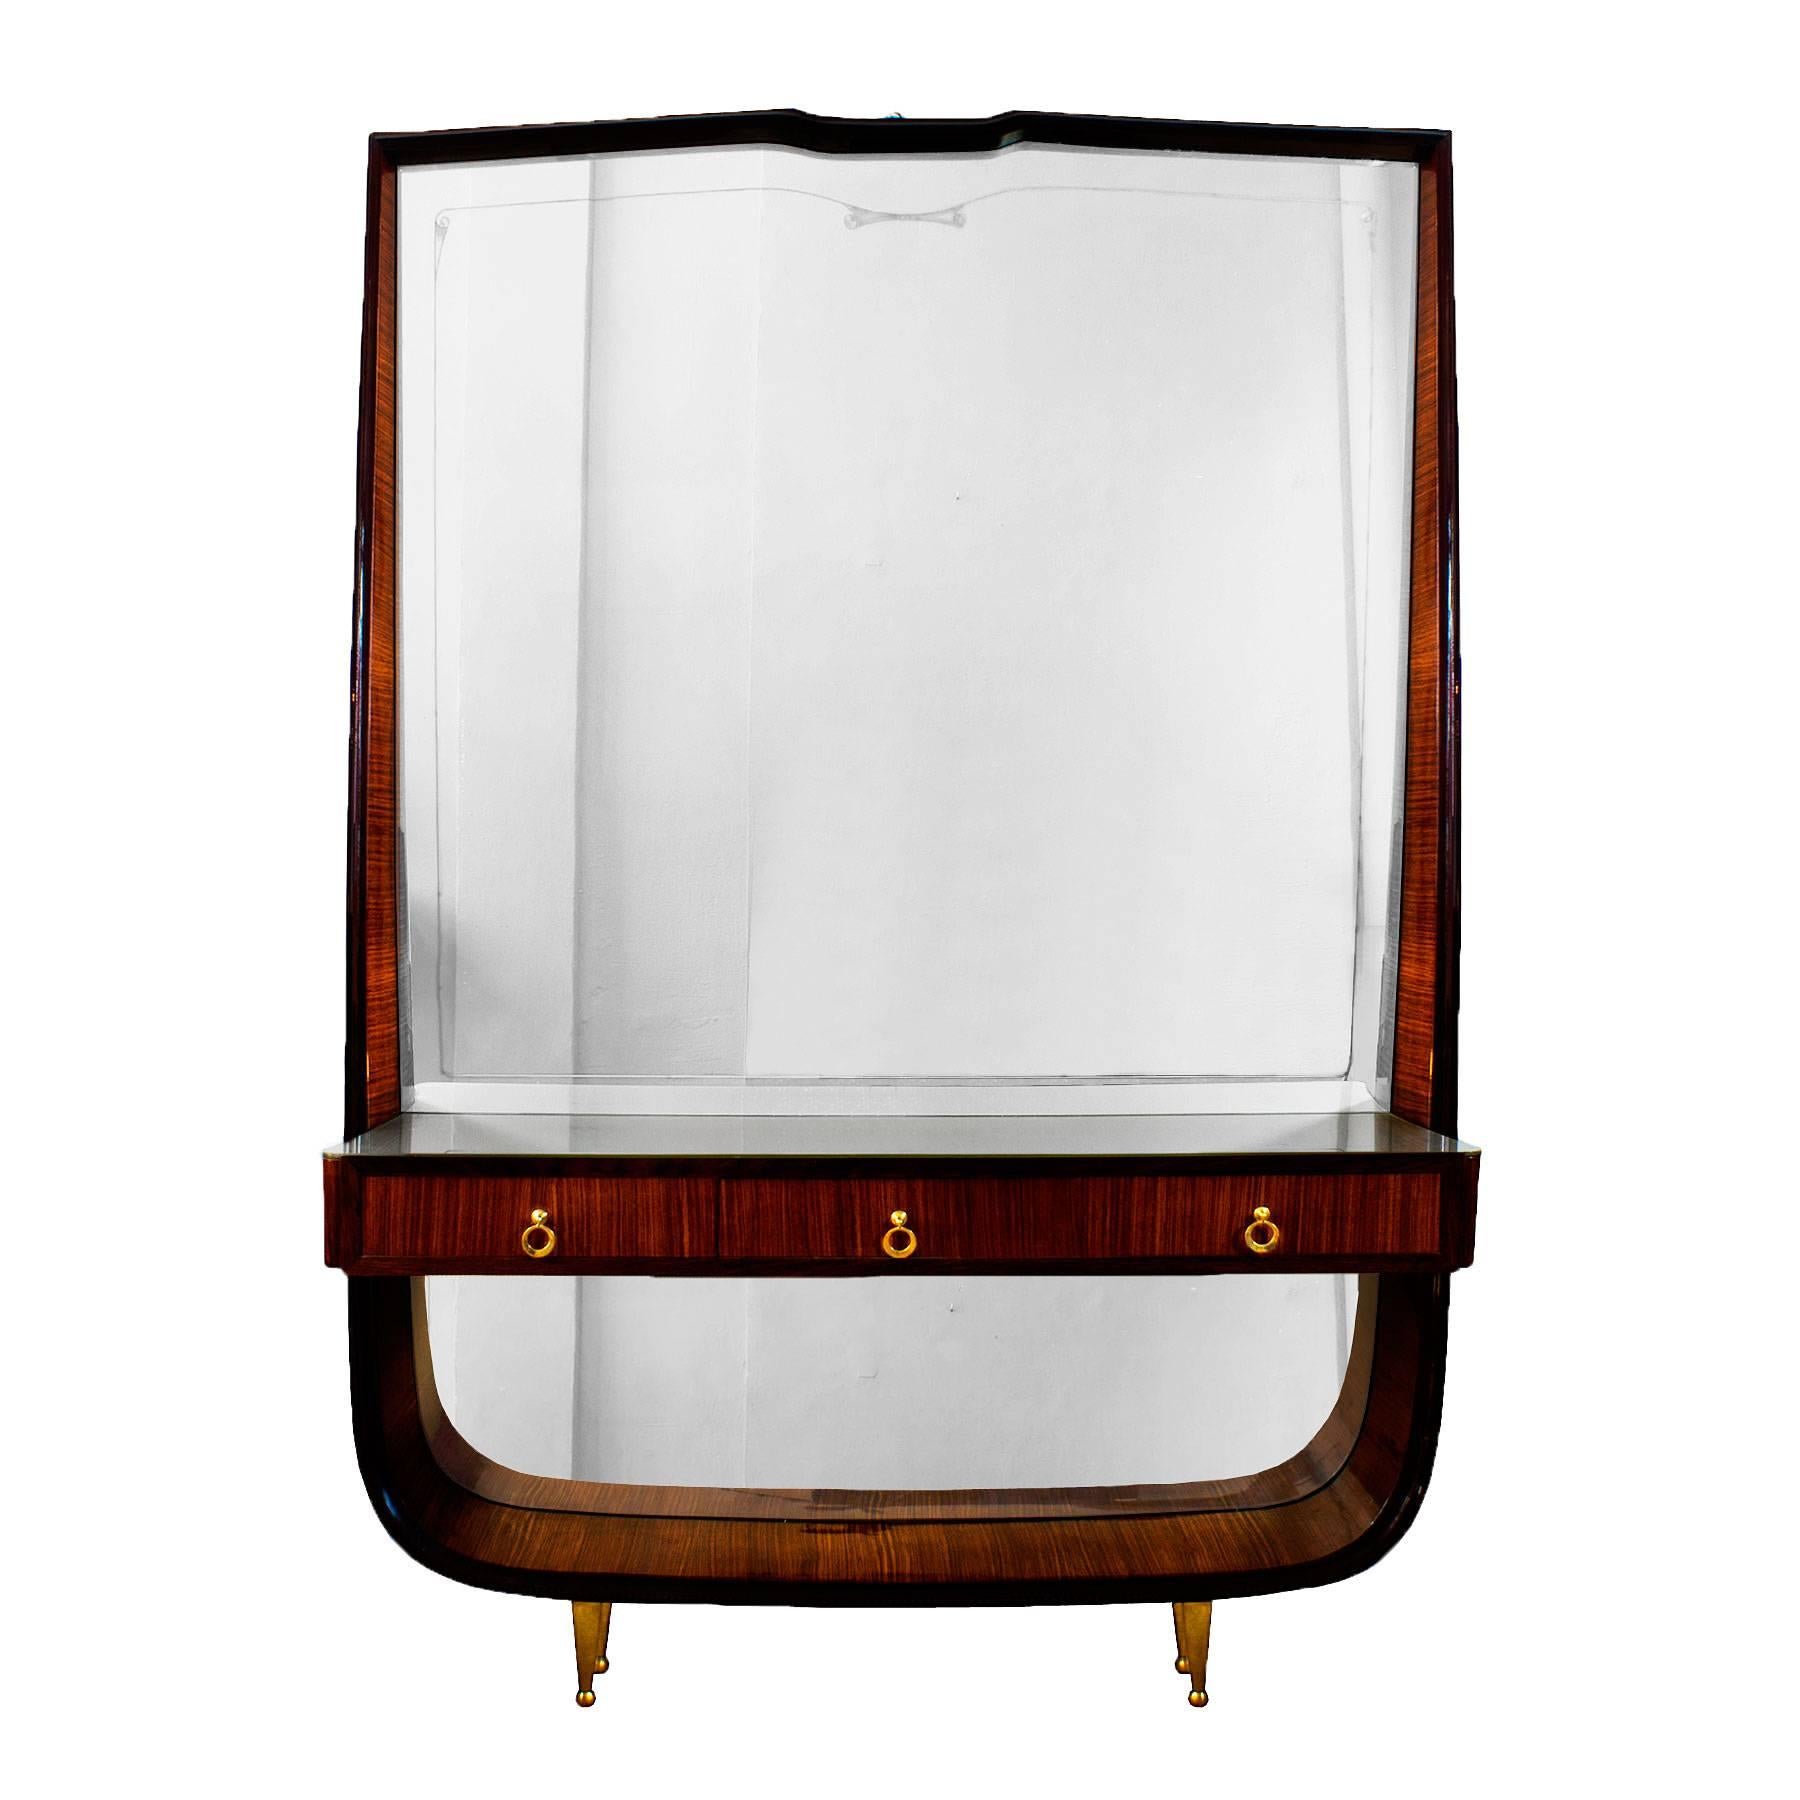 Entrance console - mirror, mahogany veneer with stained mahogany frame, french polish. Decorative engraved frieze in the original mirror (some oxidation), three drawers with a grey glass on top. Polished brass feet and handles.
Italy c. 1940